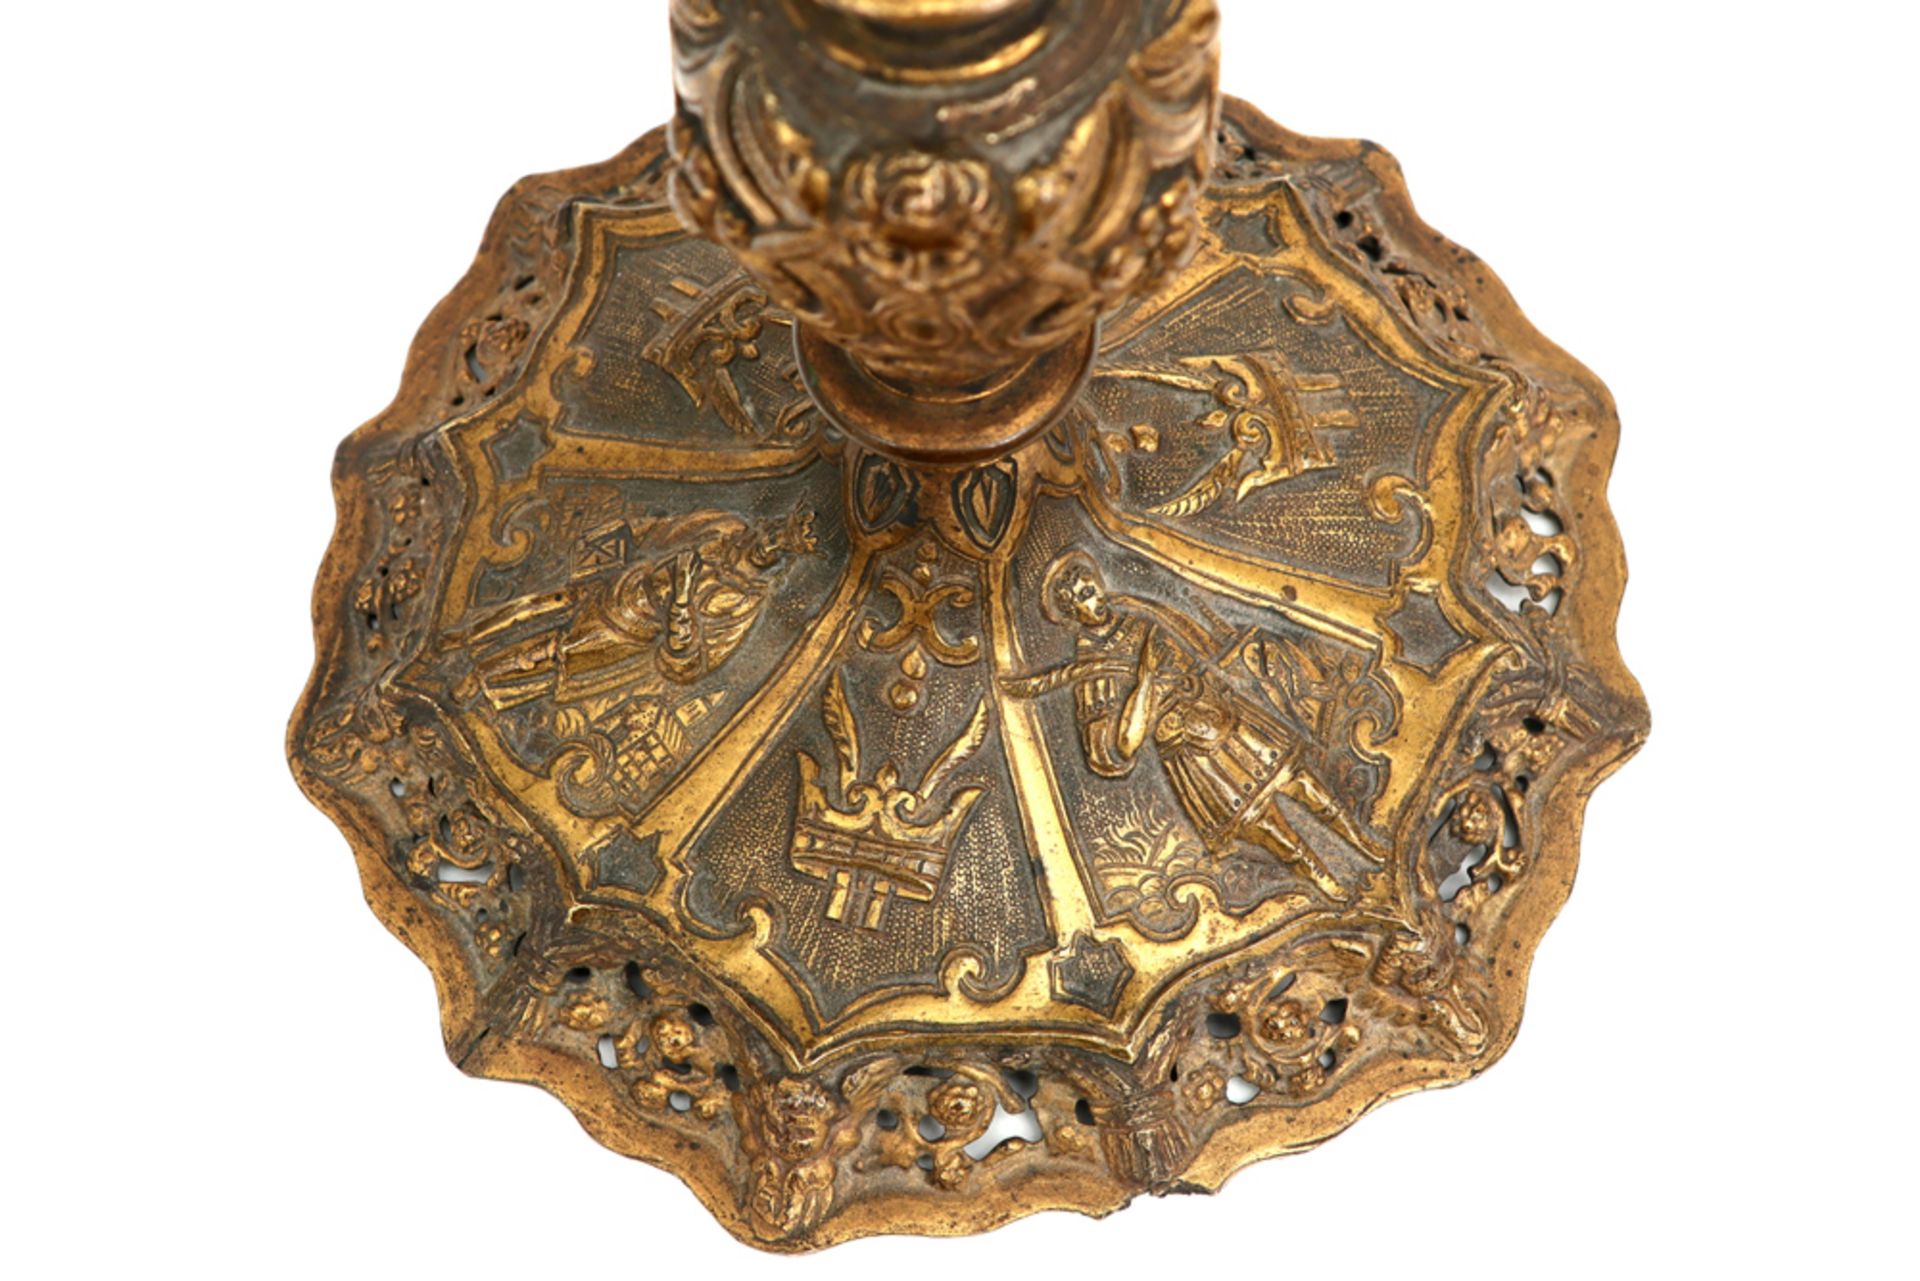 maybe 17th Cent., but certainly 18th Cent. relic holder in bronze with fine ornamentation || - Image 4 of 4